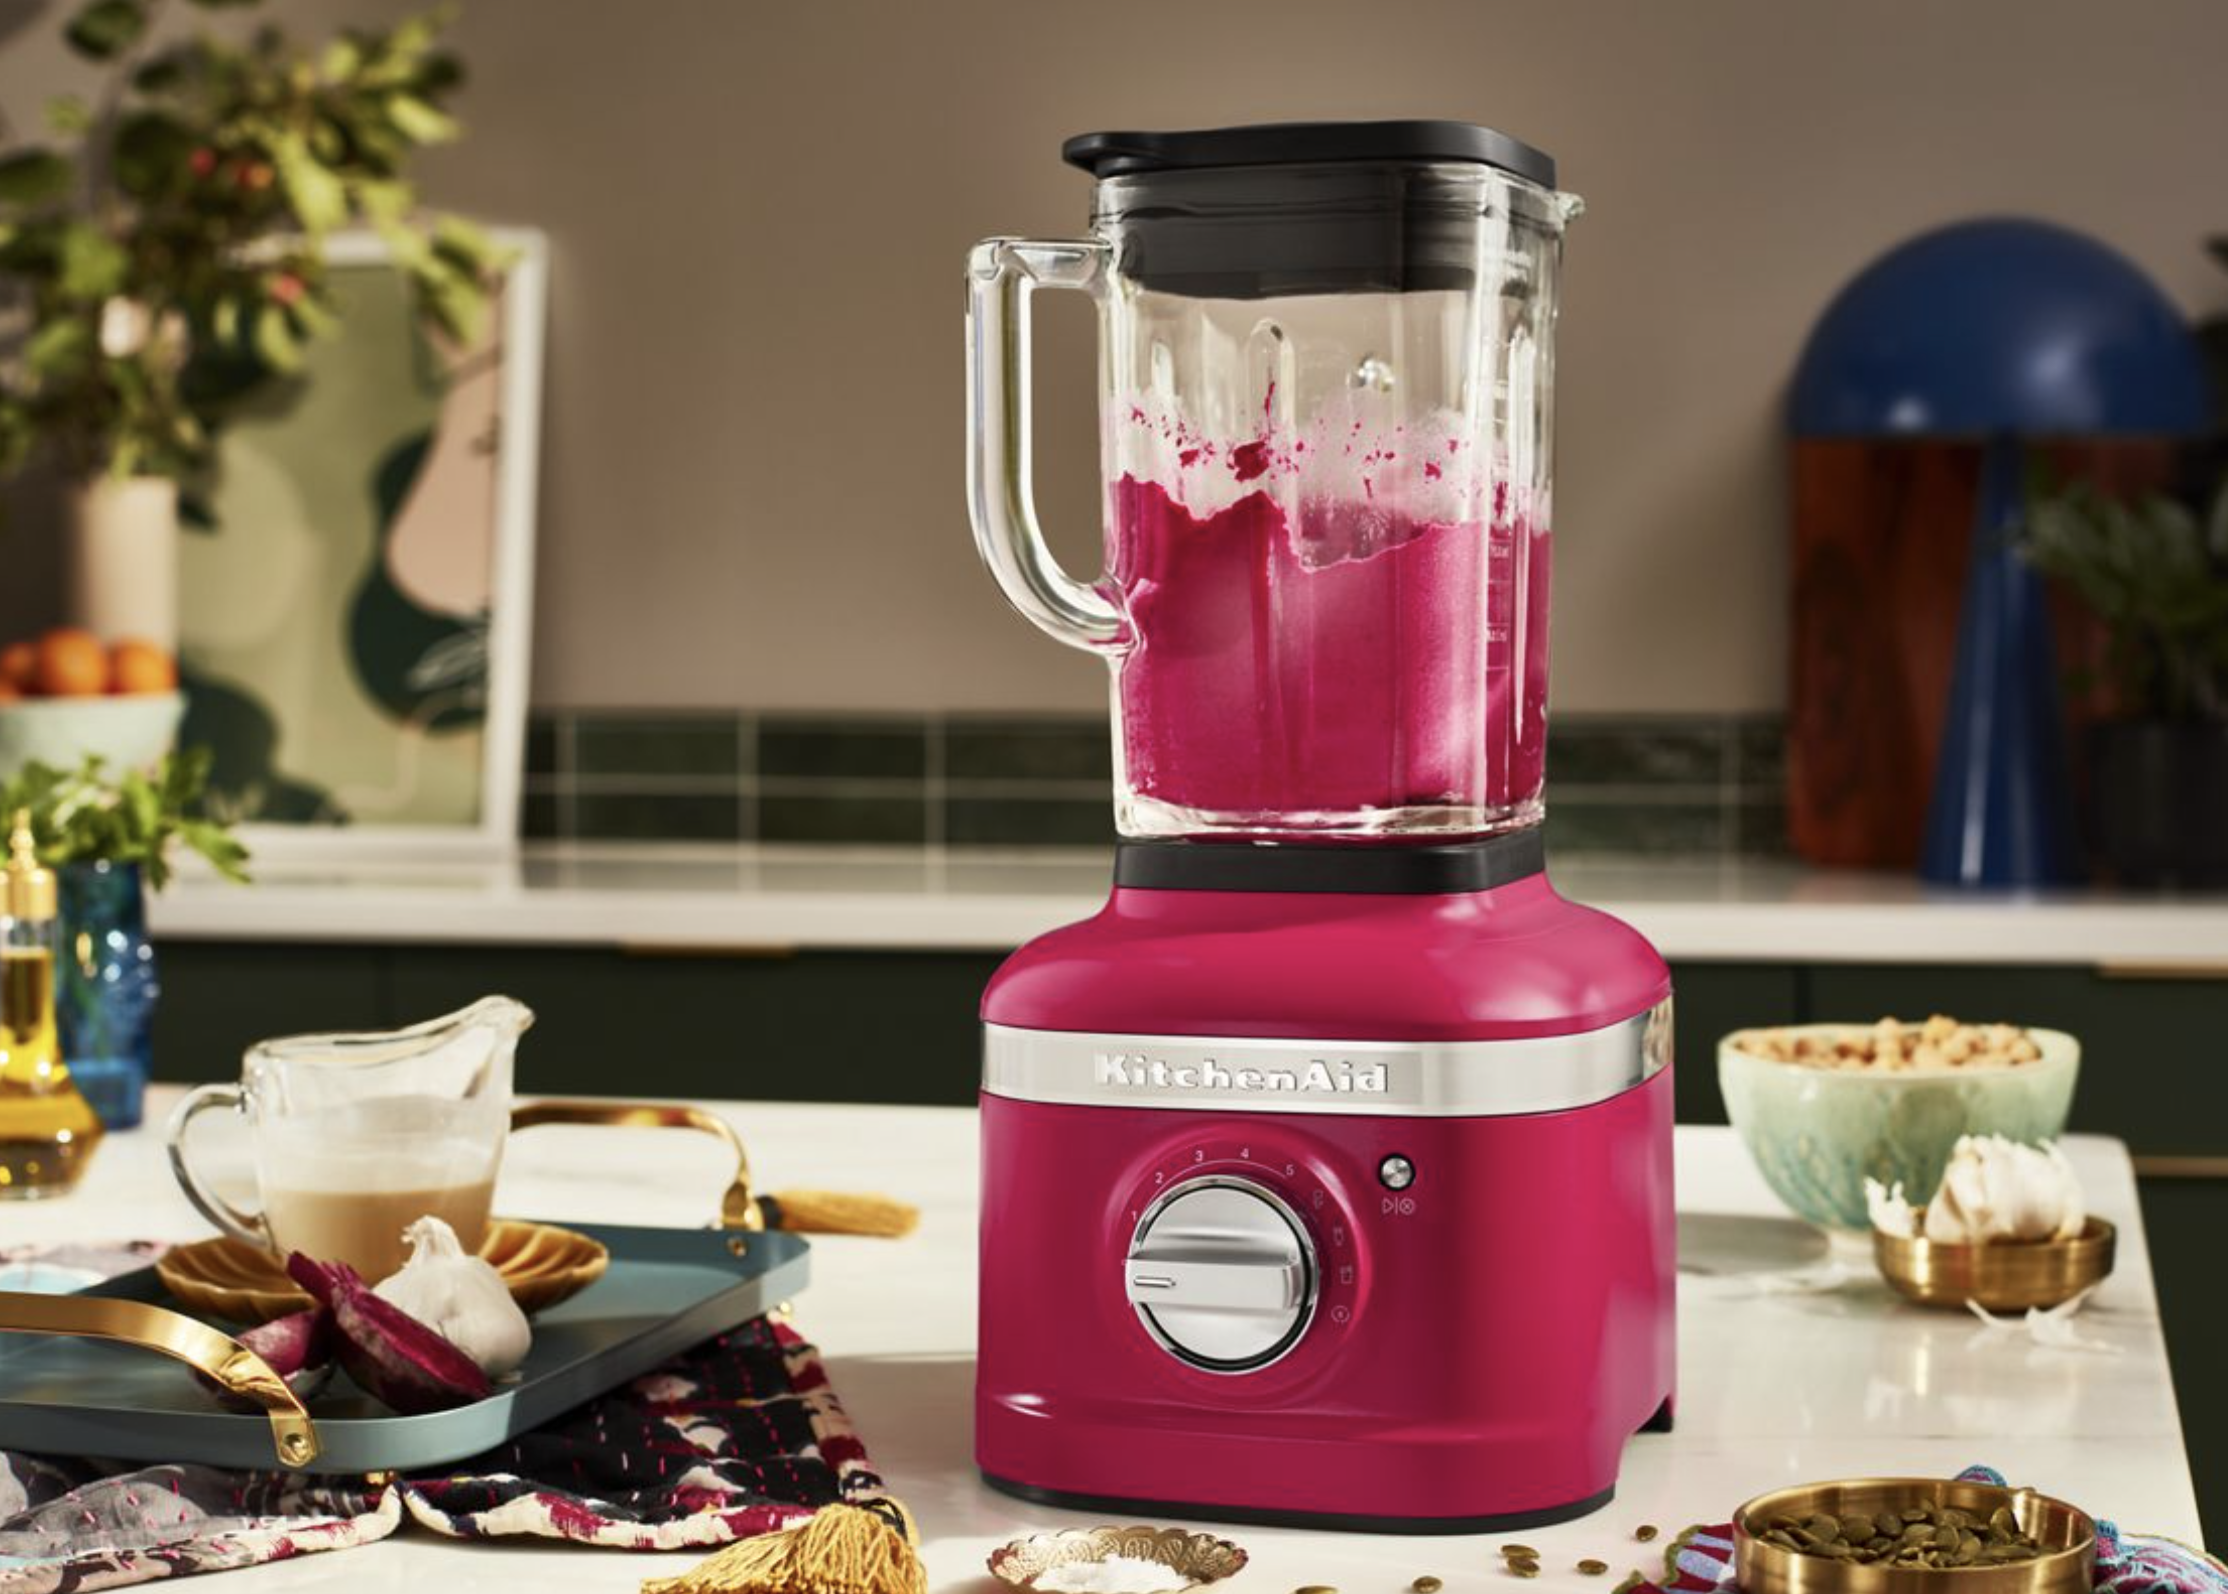 KitchenAid launches its color of the year and it's bright and